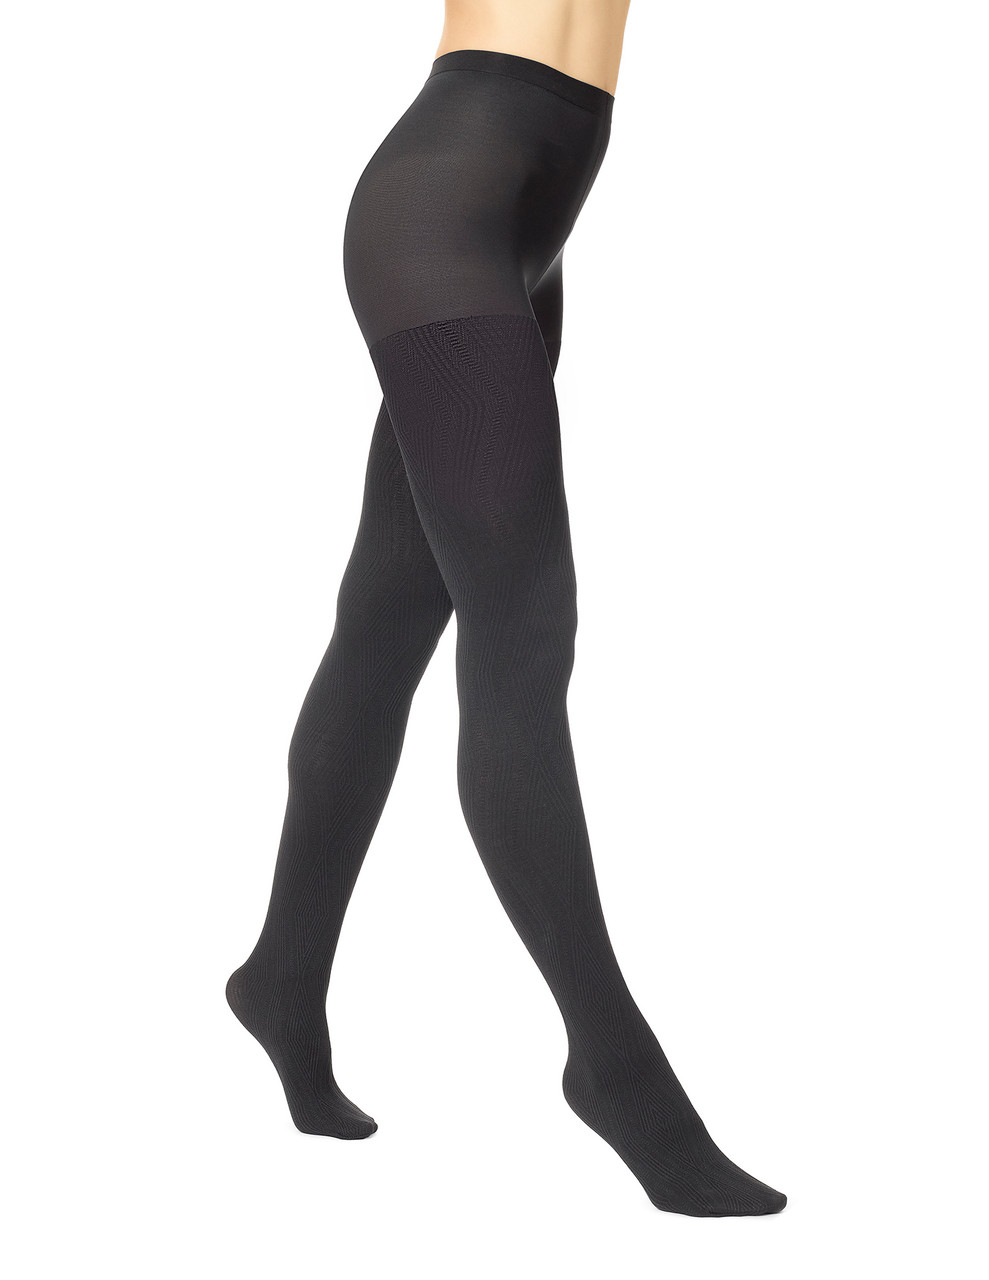 Womens Tights Diamond Pattern Control Top Black Slimming Support Pantyhose